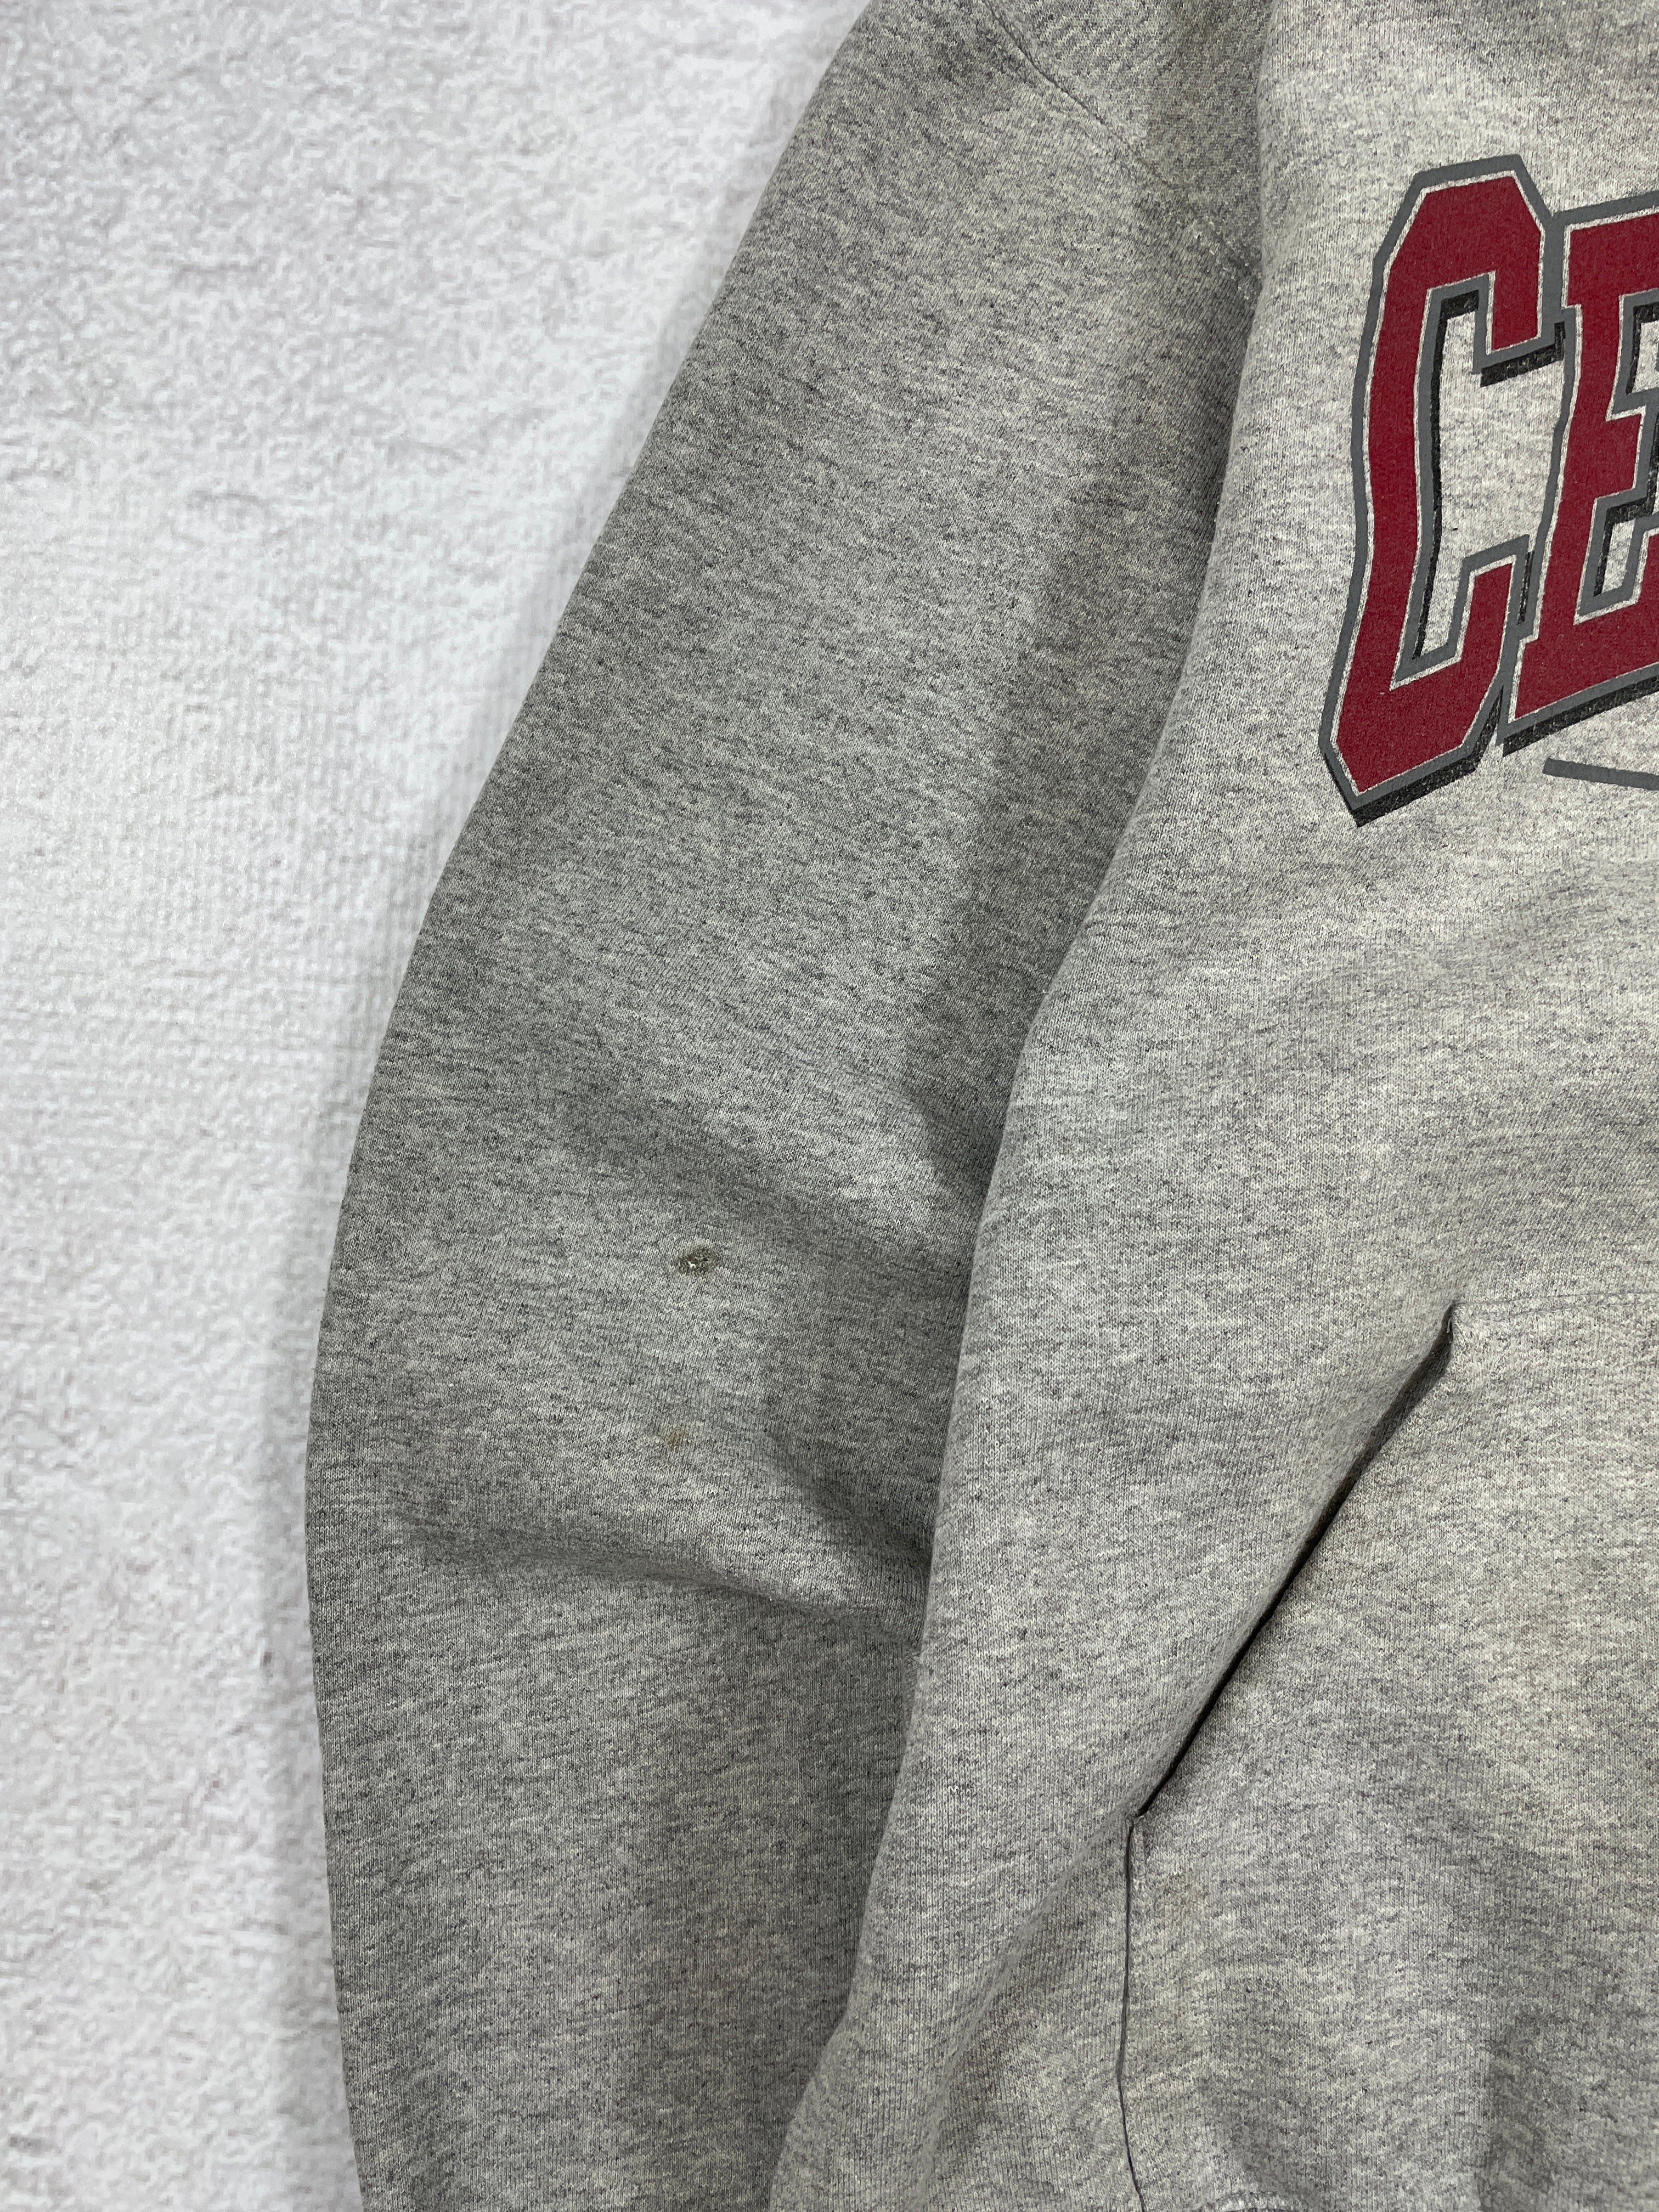 Vintage Champion Central Wildcats Hoodie - Men's Small